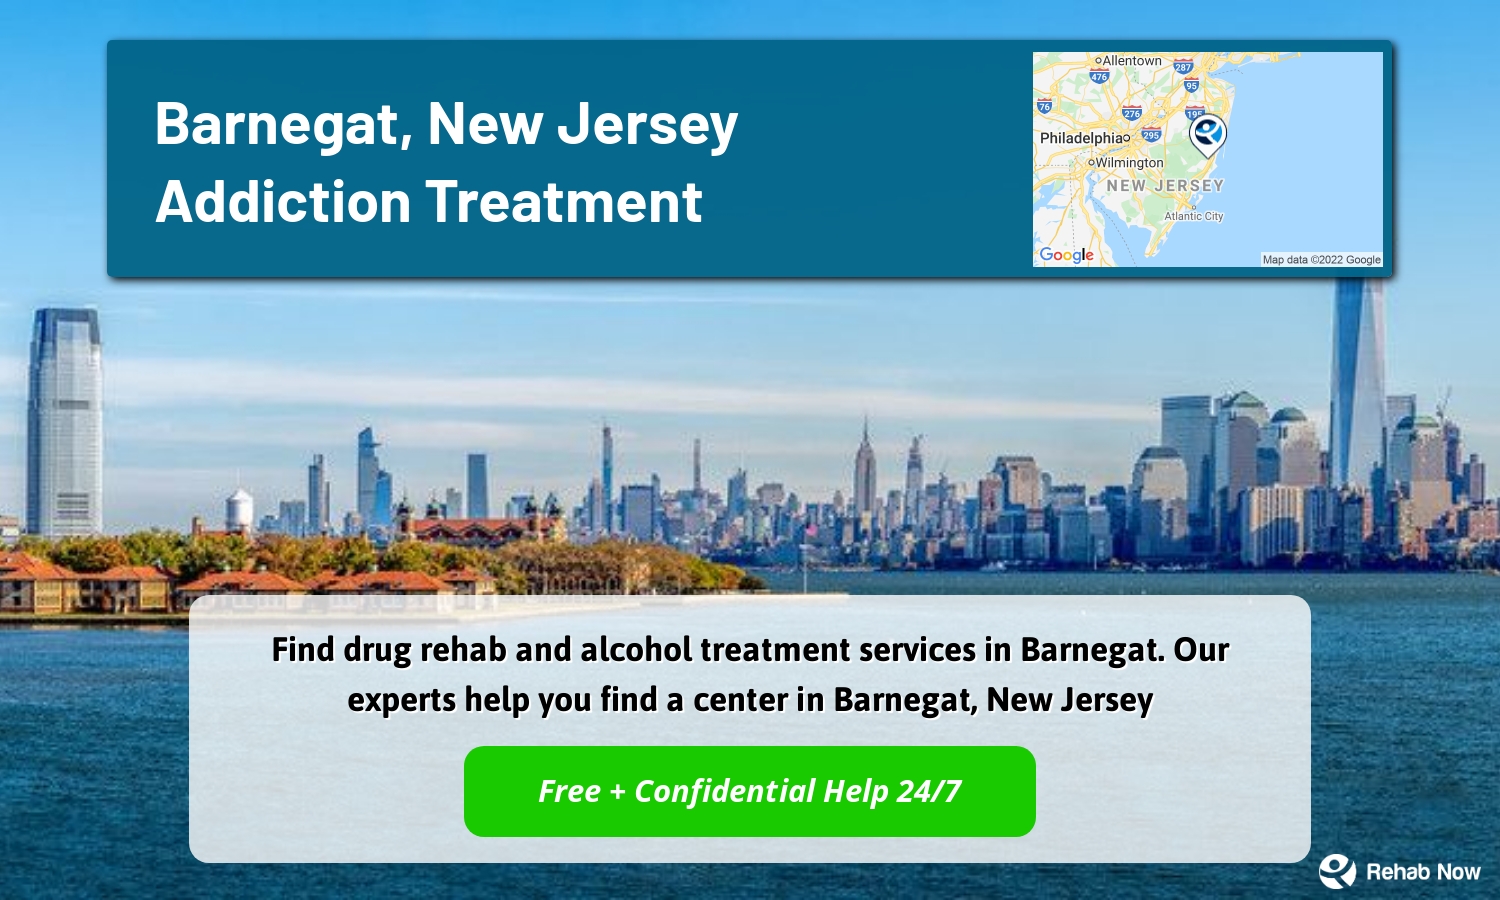 Find drug rehab and alcohol treatment services in Barnegat. Our experts help you find a center in Barnegat, New Jersey